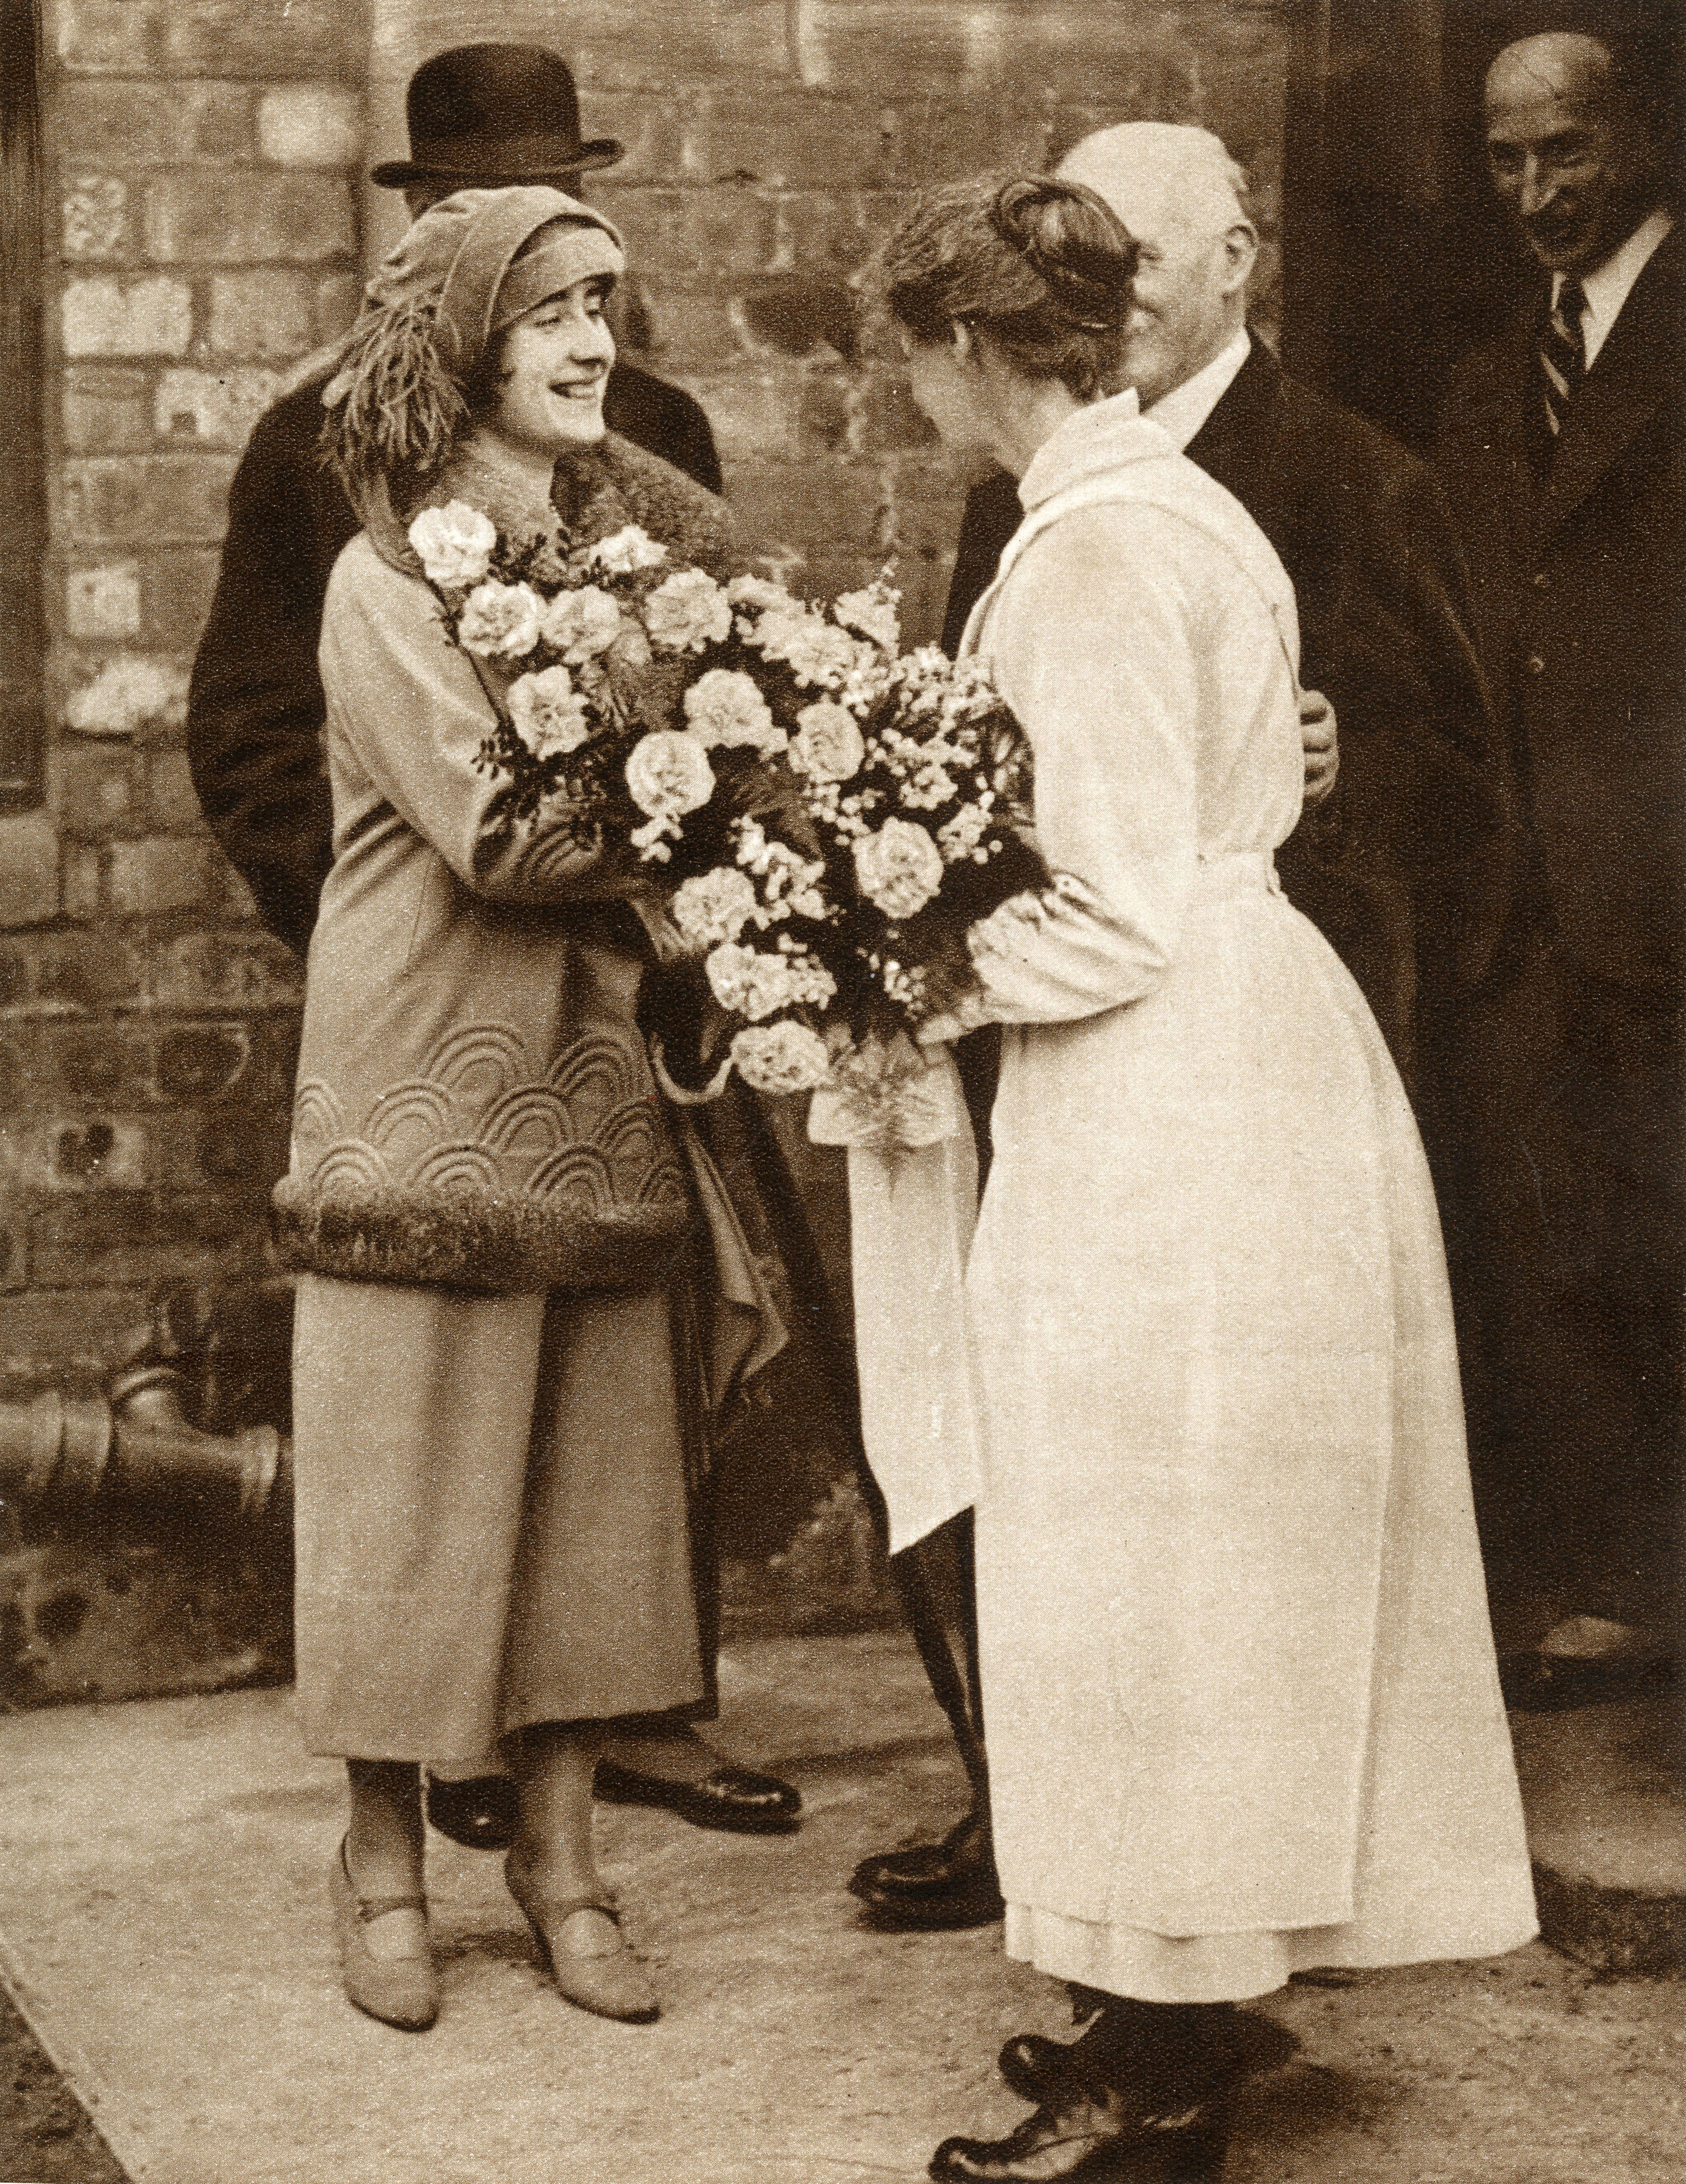 <p>A few years later, Lady Elizabeth Bowes-Lyon, later Queen Elizabeth the Queen Mother, was presented with a bouquet of flowers during a 1923 visit to the Mcvitie & Price Factory in Edinburgh, Scotland. The company was tasked with making her wedding cake for her forthcoming marriage to Albert, Duke of York (later King George VI).</p>